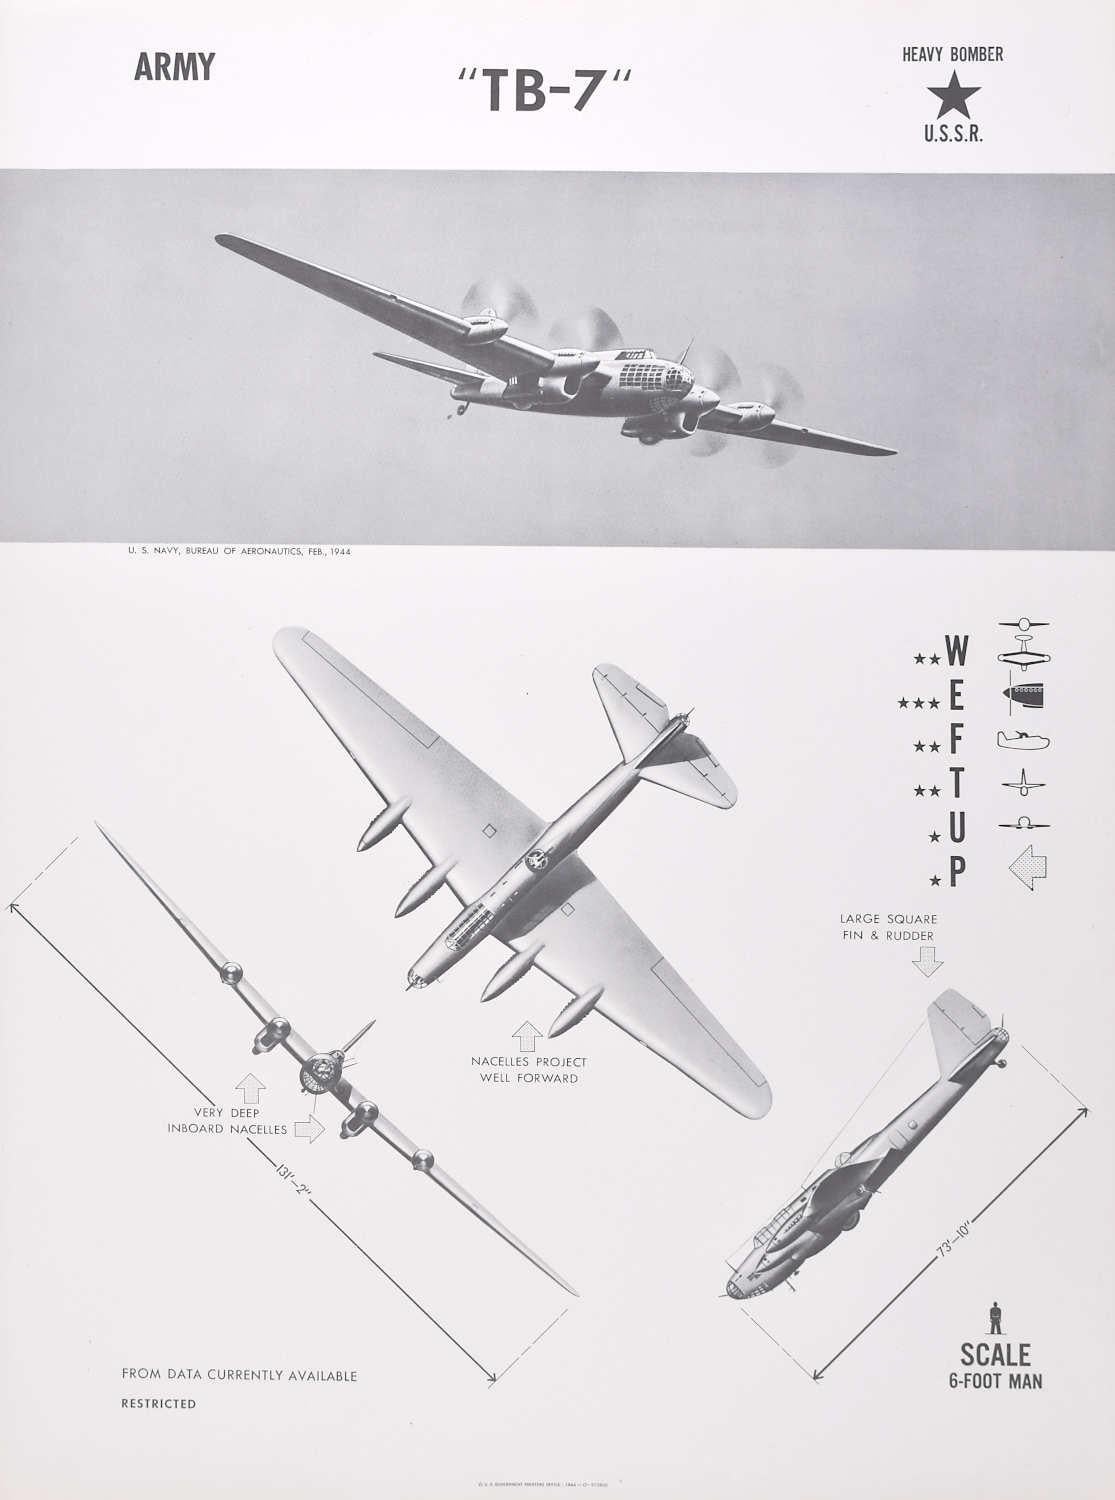 1944 "TB-7" USSR heavy bomber plane identification poster WW2 - Print by Unknown